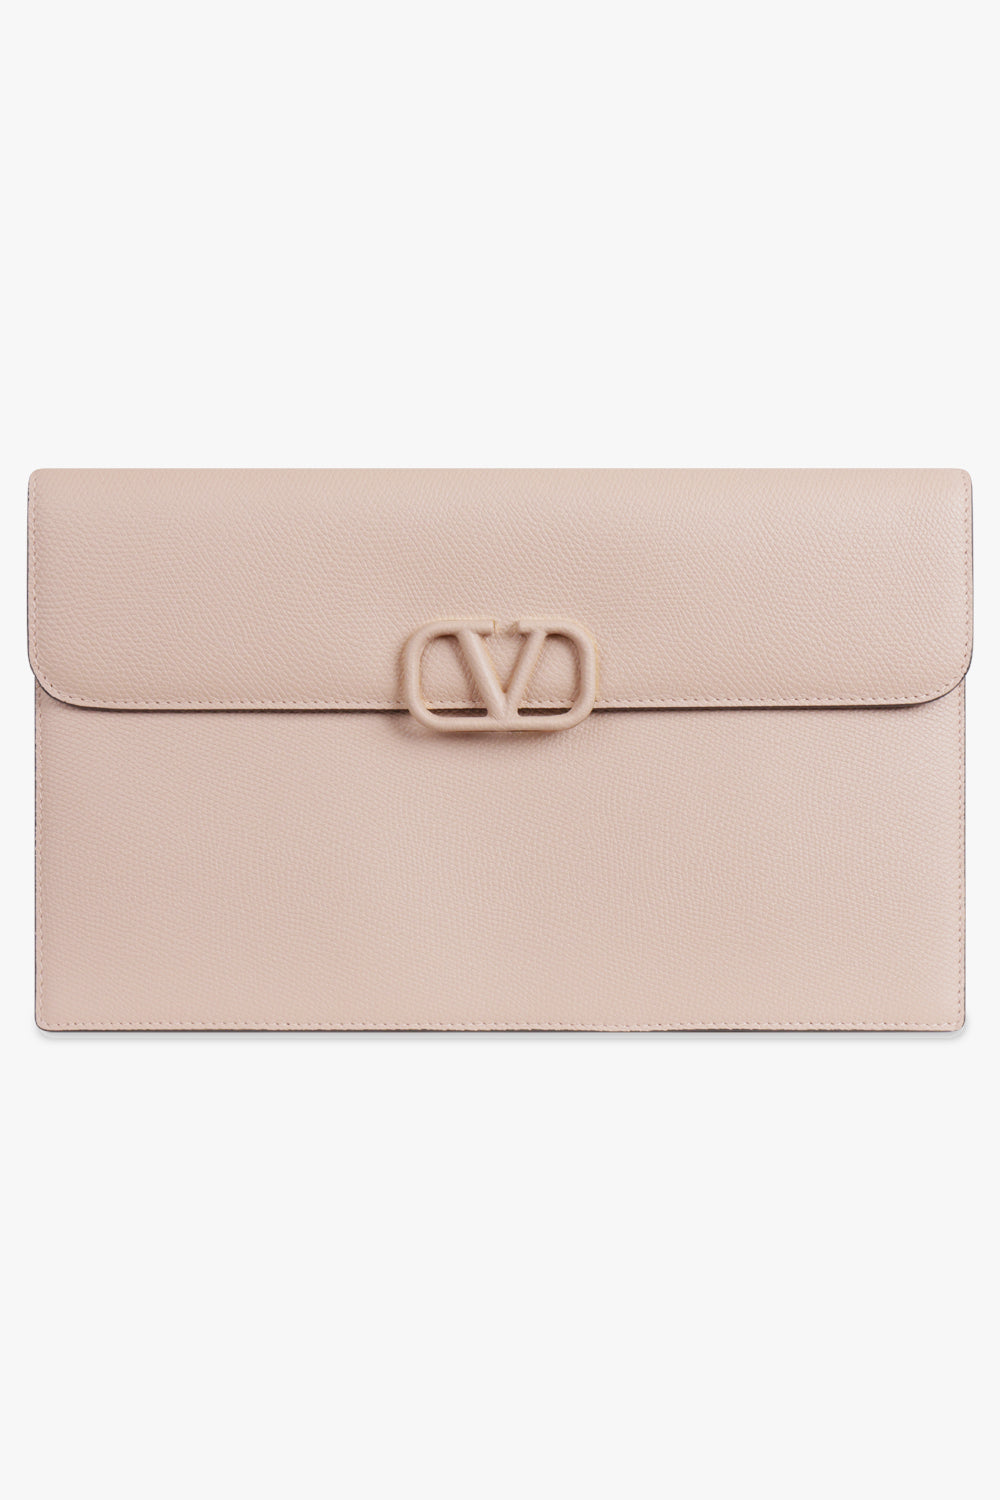 VALENTINO GARAVANI JEWELERY PINK VRING SIGNATURE POUCH ROSE CANNELLE